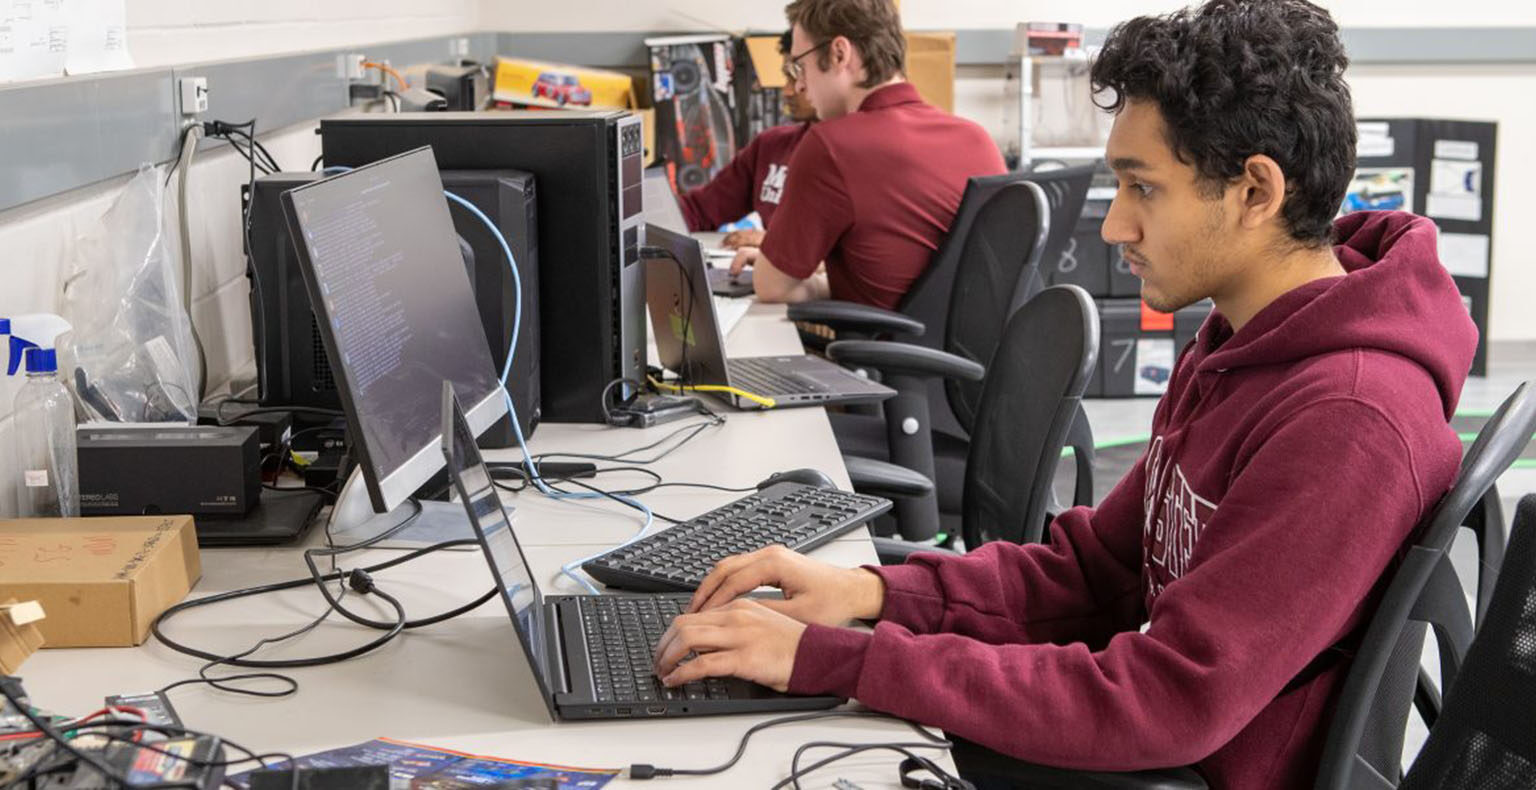 Students working on computers at the McMaster Centre for Software Certification